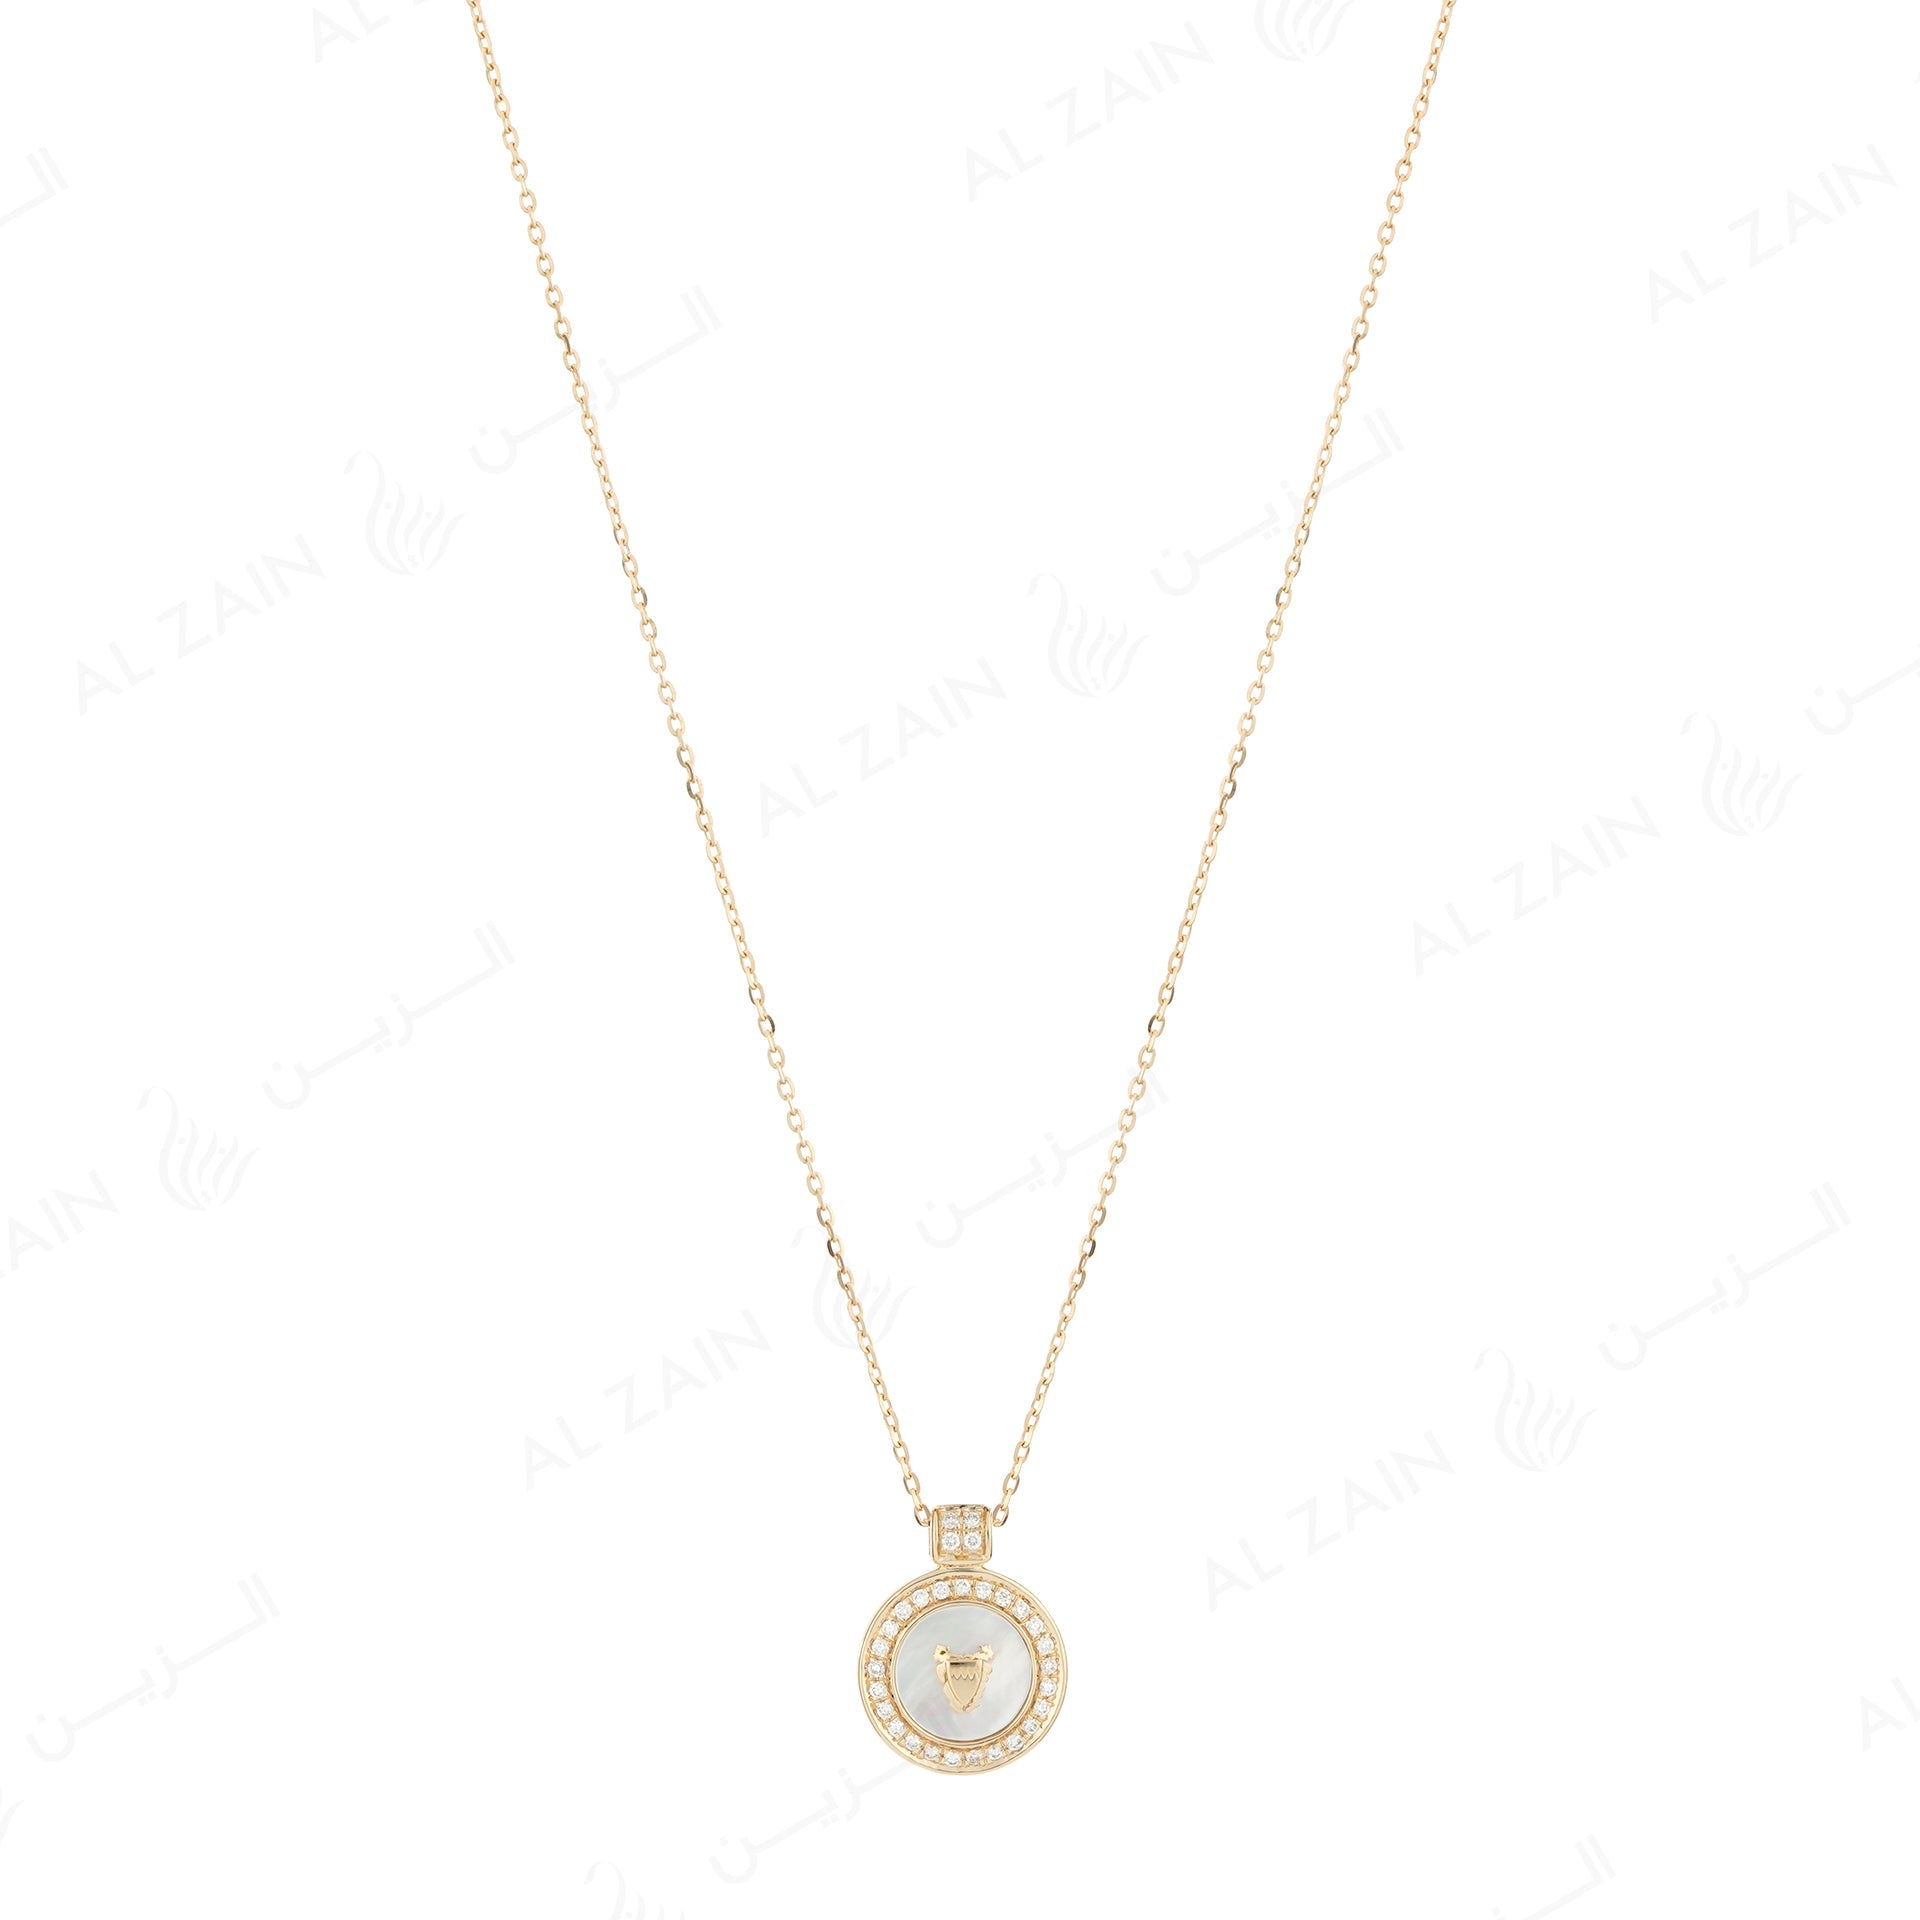 Bahrain flag Necklace in 18k yellow gold with Mother of Pearl and Diamonds